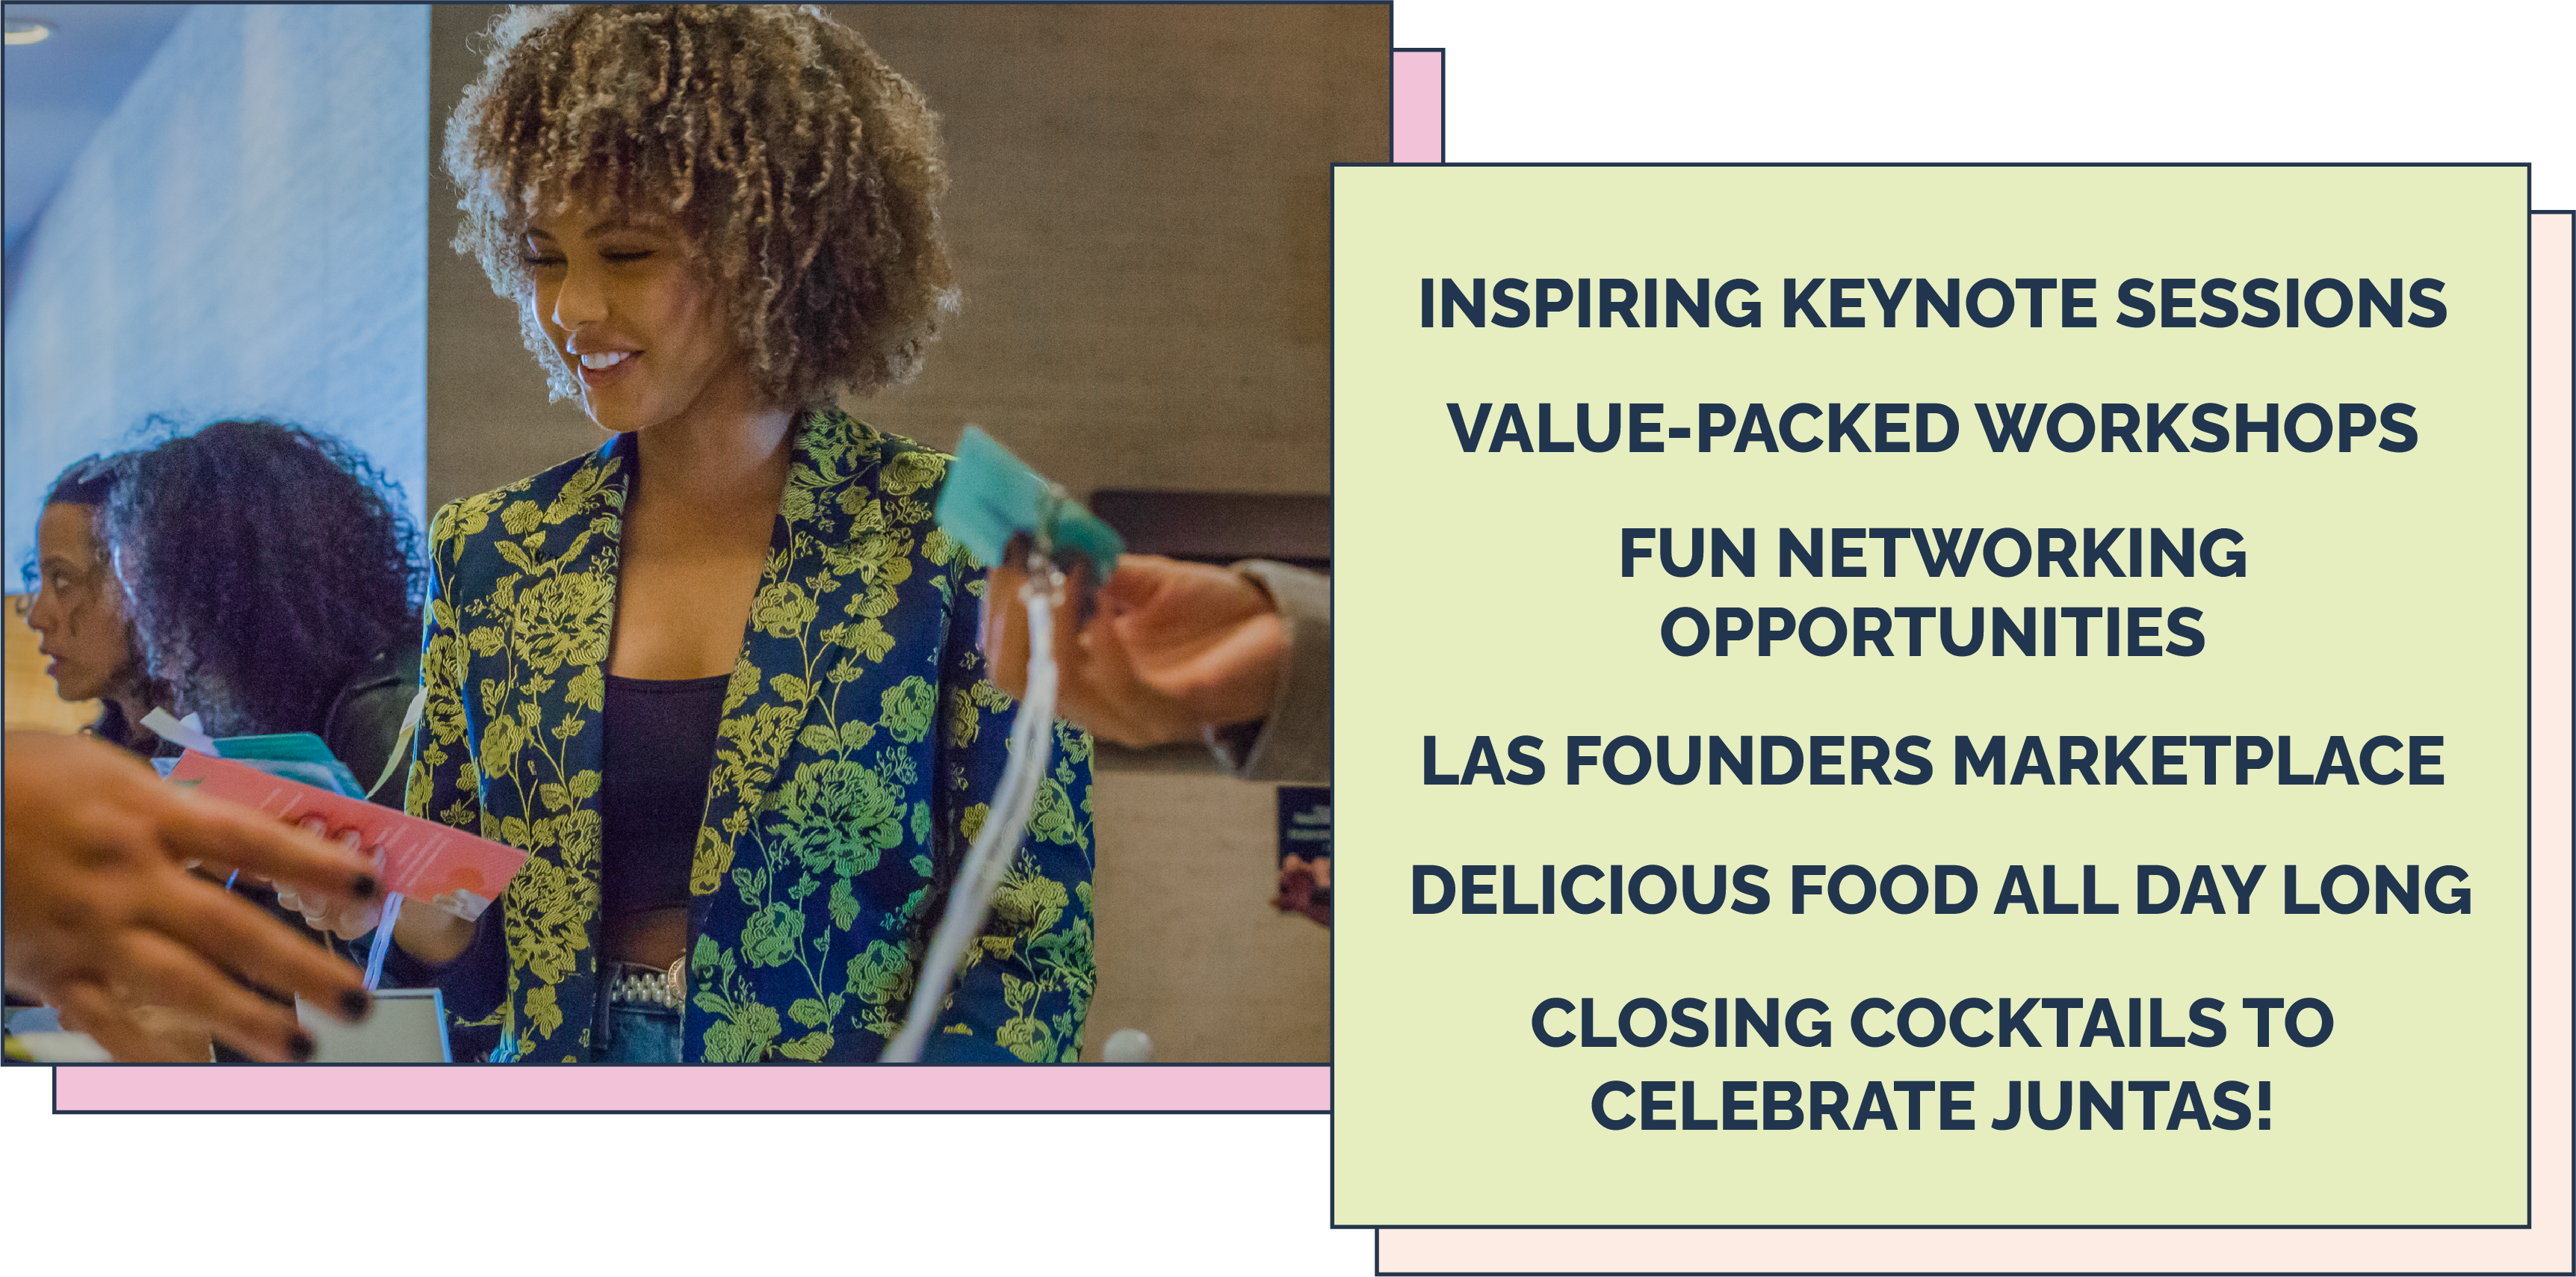 Inspiring keynote sessions. value-packed workshops. fun networking opportunities. Las founders marketplace. delicious Food All day long. closing cocktails to celebrate juntas!